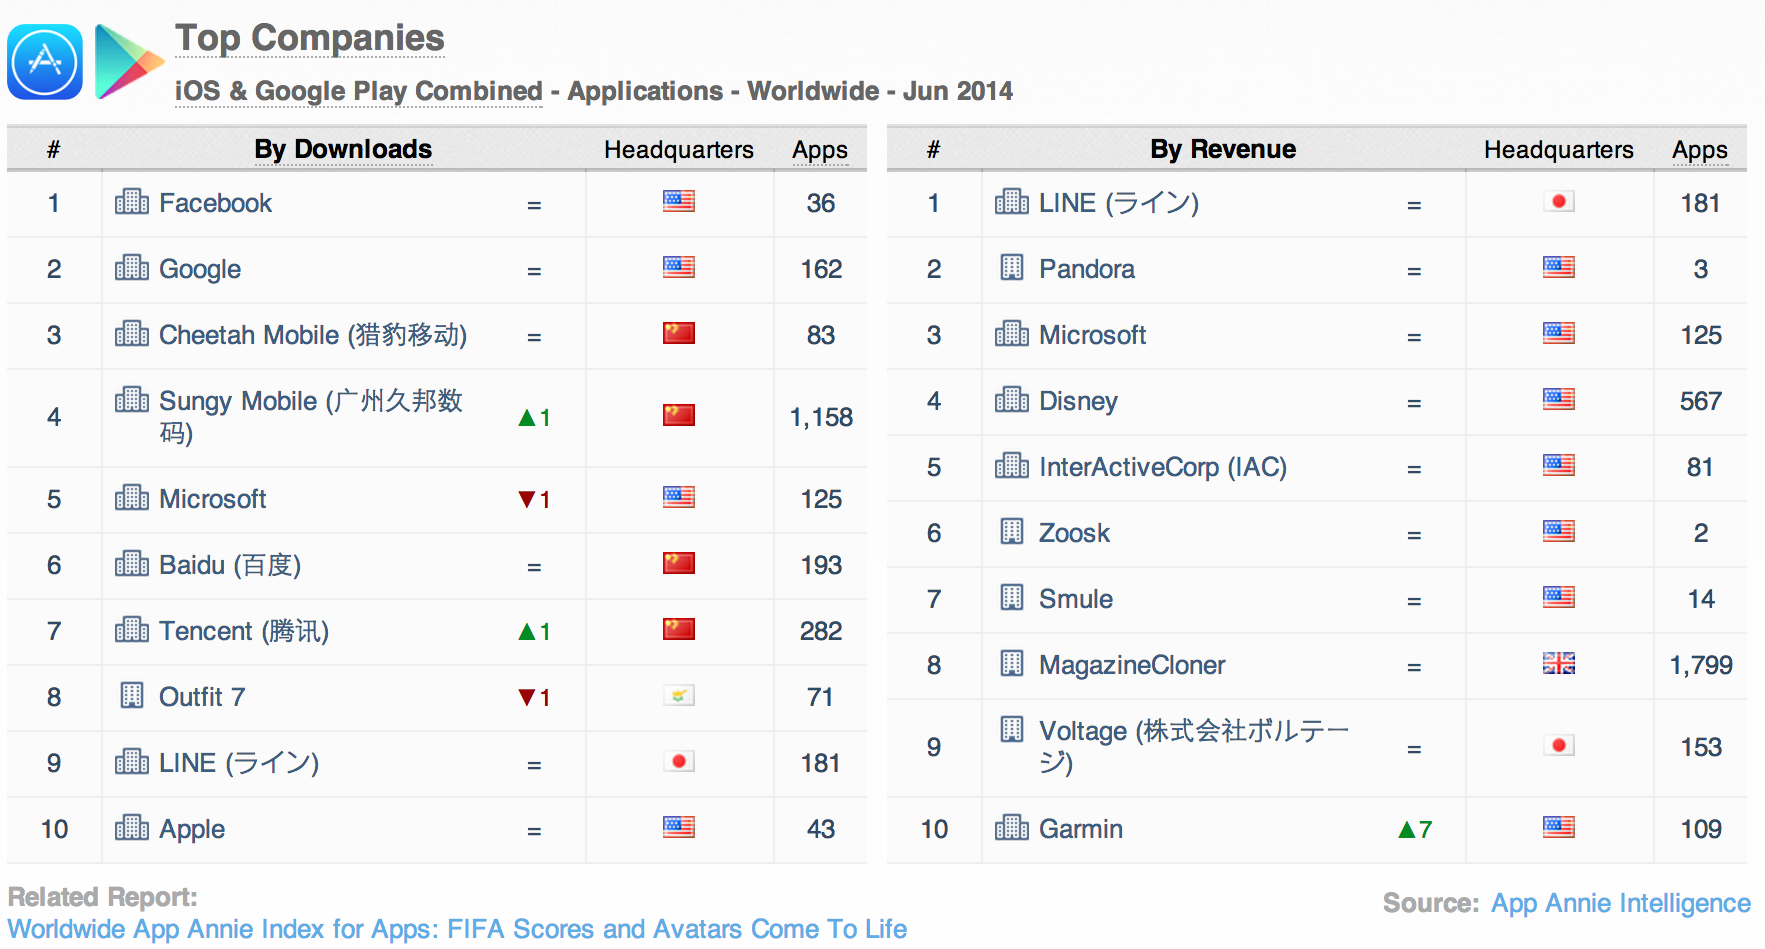 Top Companies iOS and Google Play combined apps worldwide June 2014